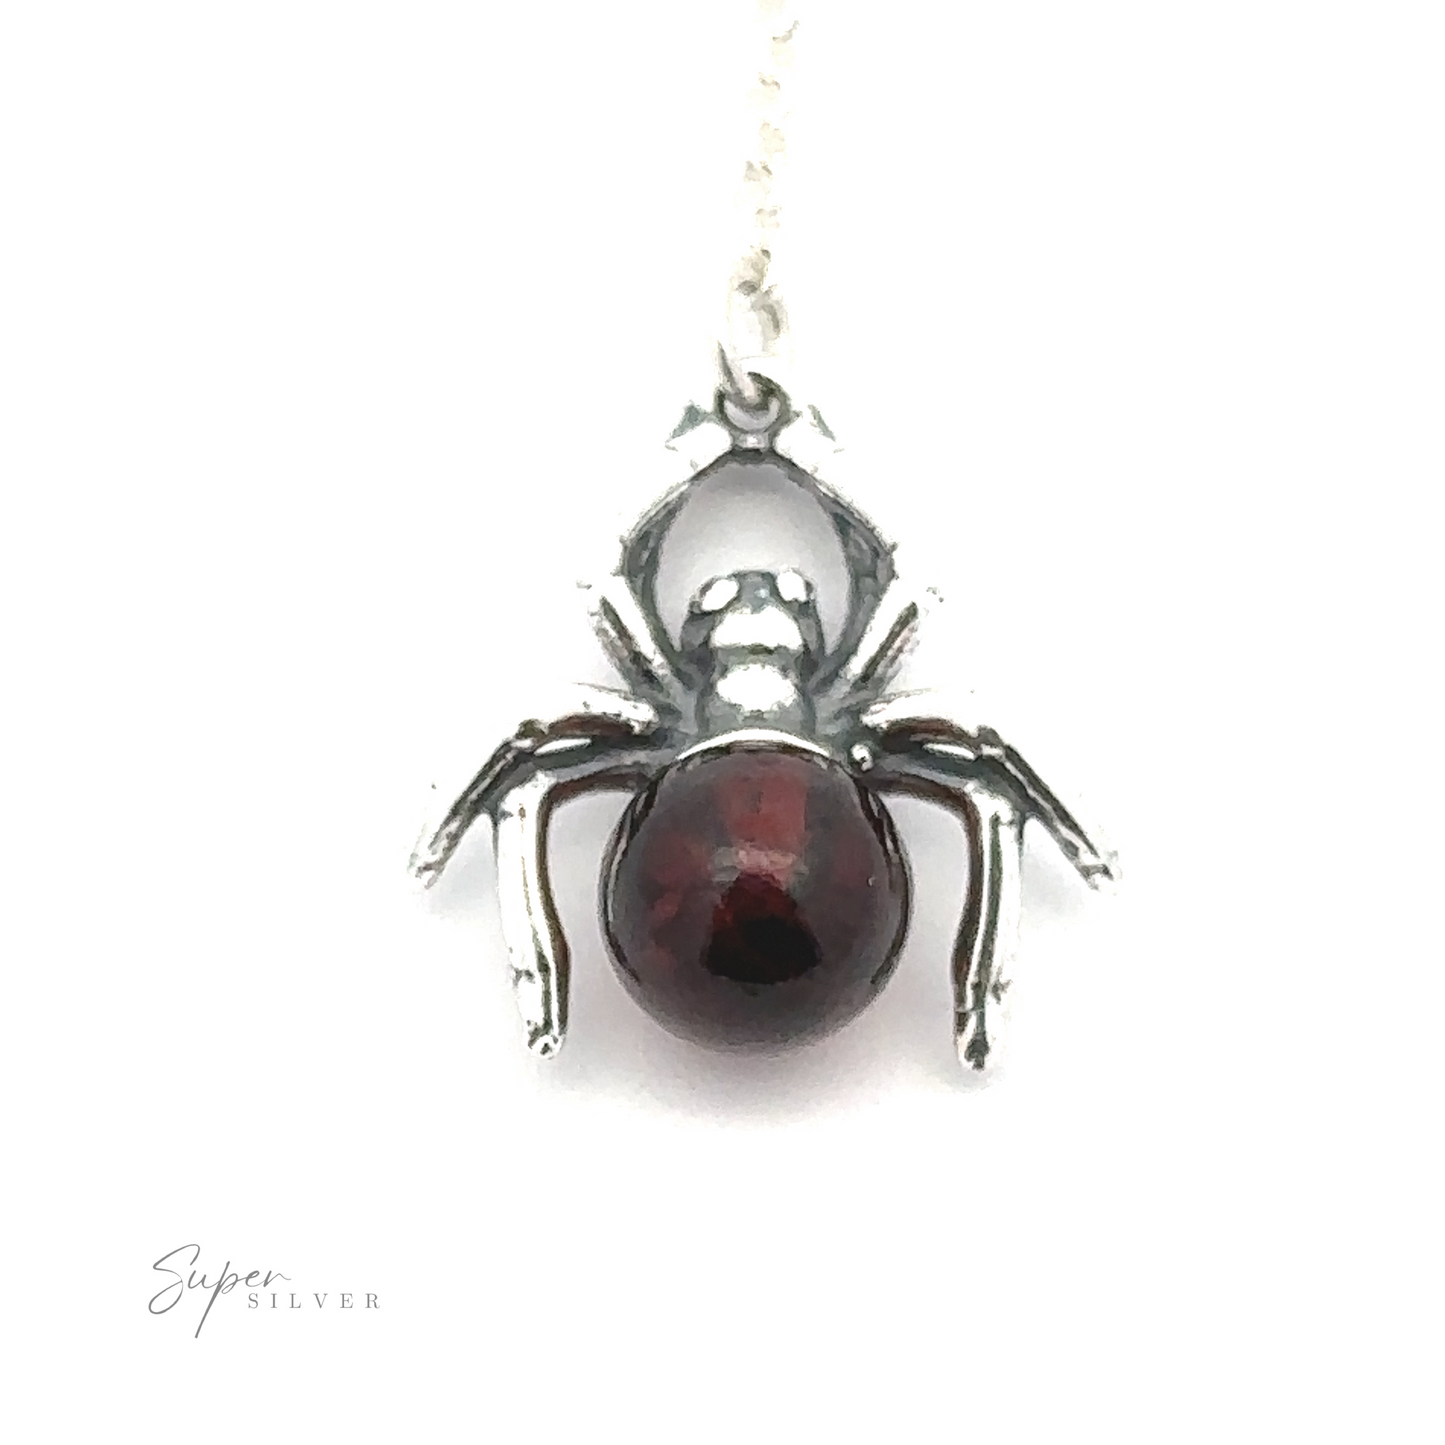 
                  
                    A Baltic Amber Spider Necklace with a dark, round Baltic amber gemstone on its back, hanging from a silver chain. "Super Silver" is inscribed in the bottom left corner, adding a witchy vibe to the piece.
                  
                